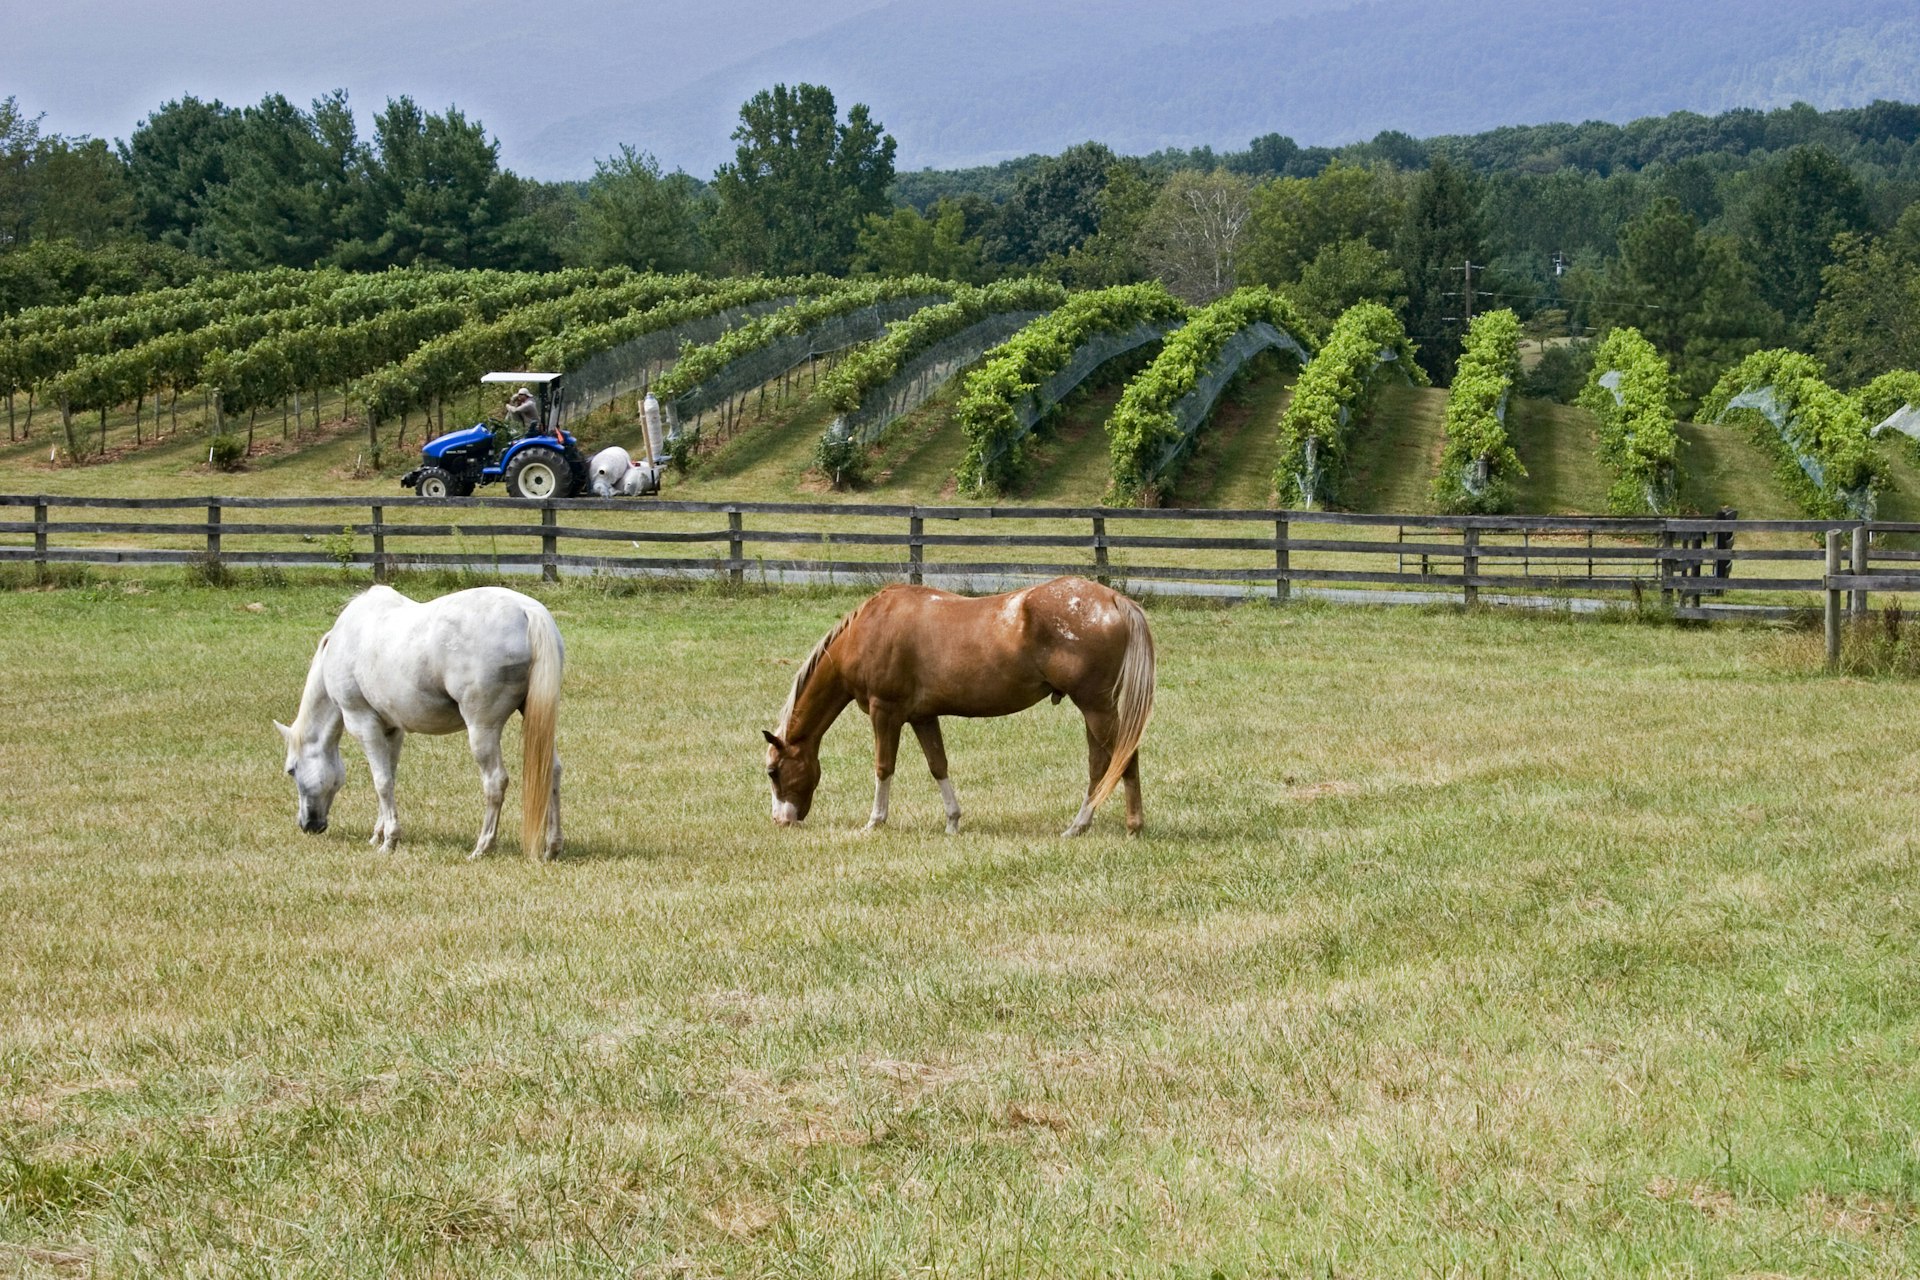 A Virginia winery with two horses in the foreground